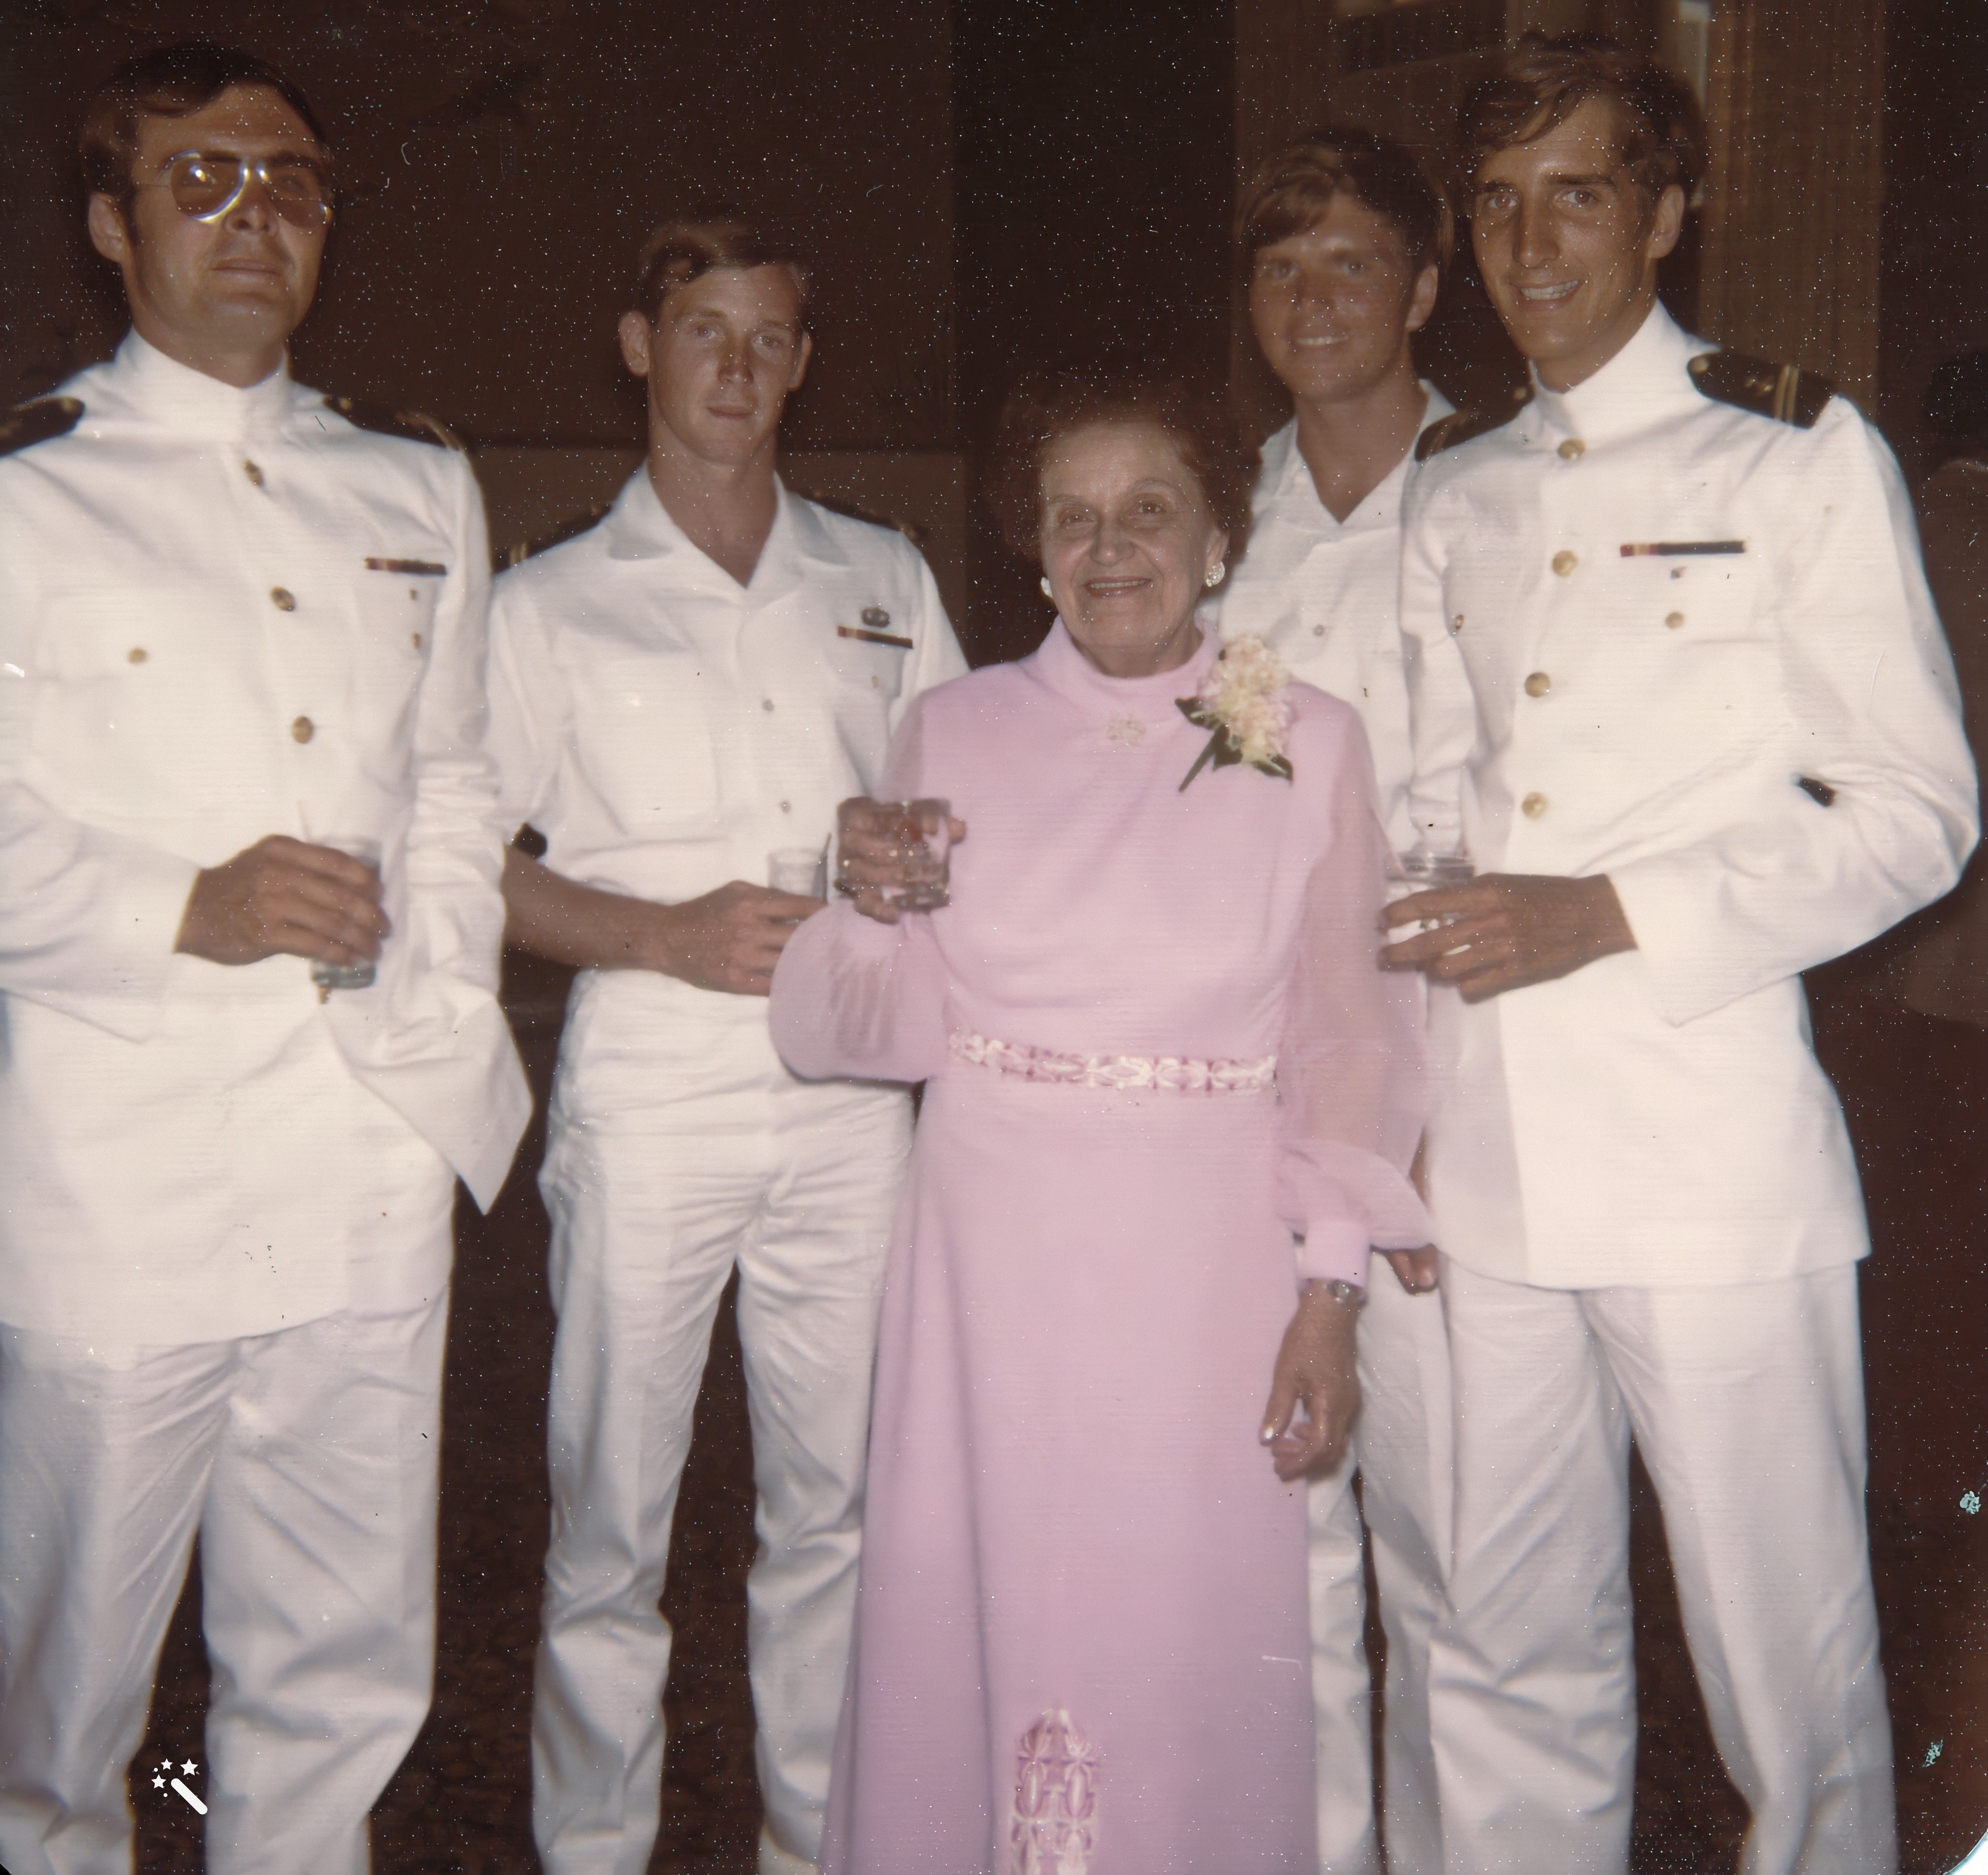 Edith with some young men at the wedding reception